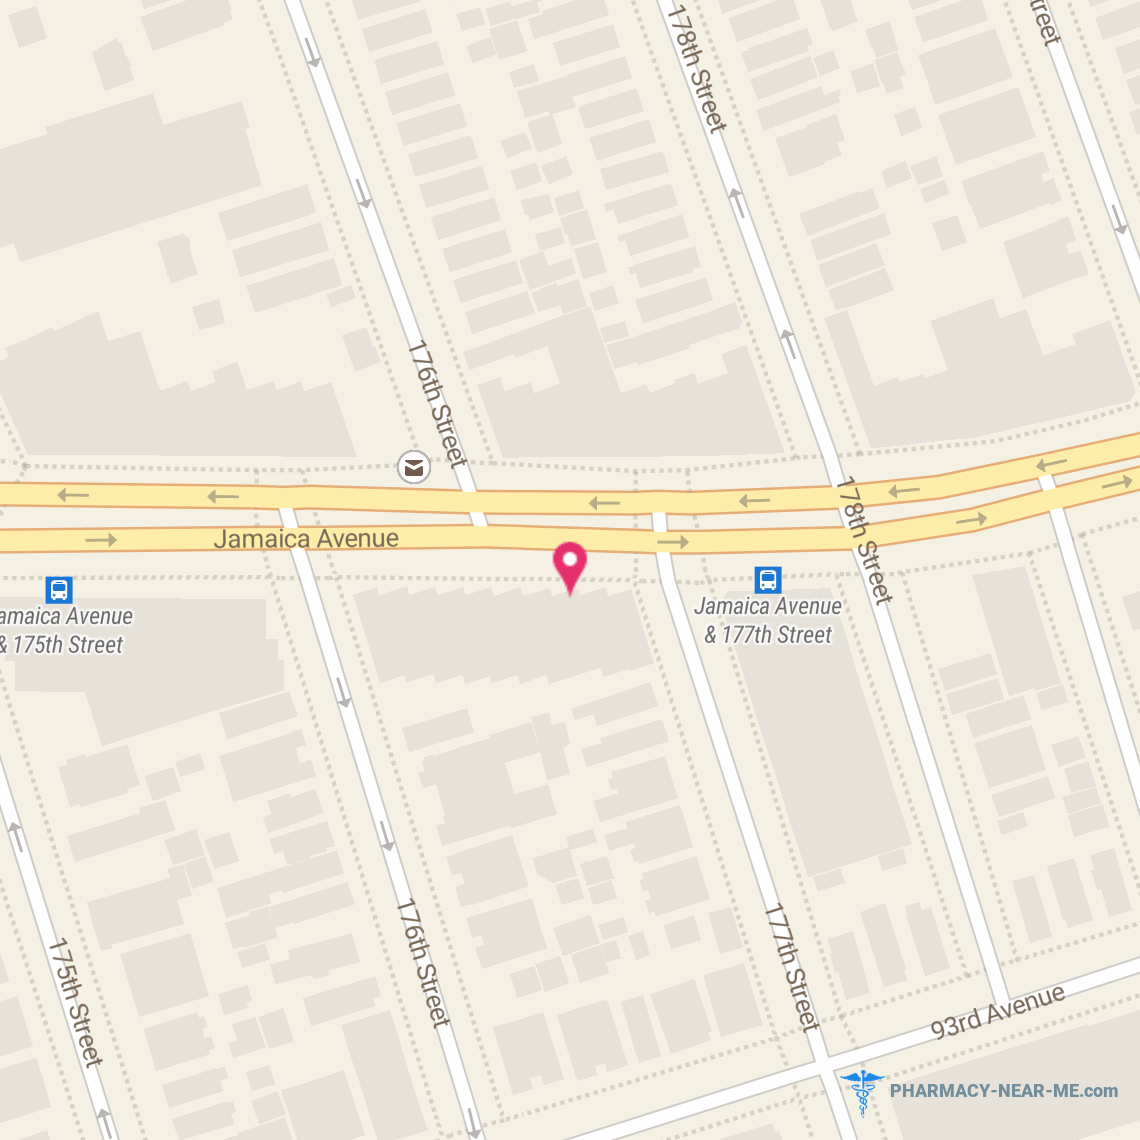 WALGREENS #04564 - Pharmacy Hours, Phone, Reviews & Information: 15934 Jamaica Ave, Queens, New York 11433, United States